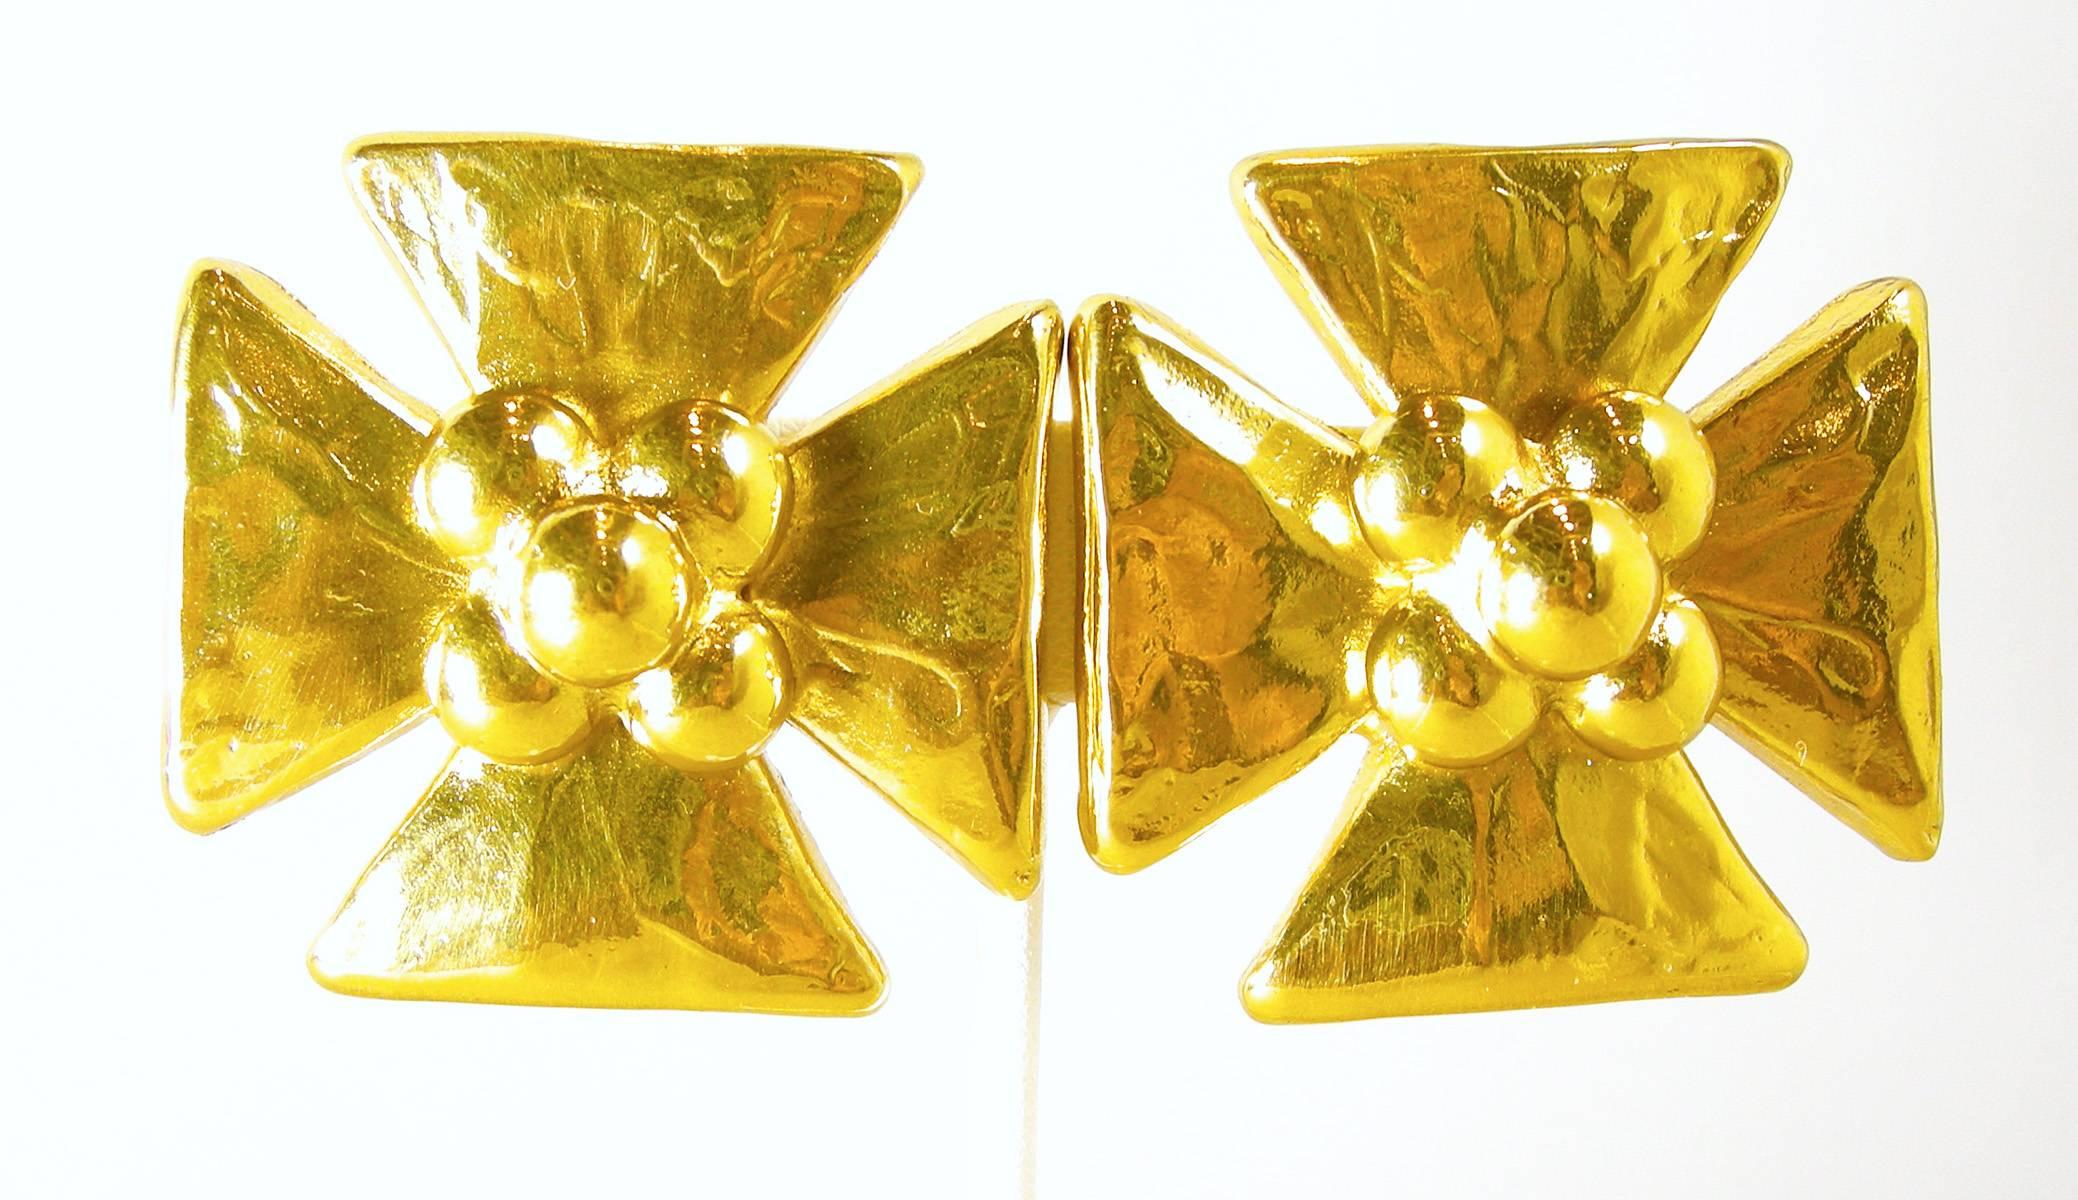 These are a pair of authentic vintage YSL clip templar cross earrings. They are massive and are in a gold tone setting. They measure 1-3/8” x 1-3/8”. They are signed “YSL Made in France”. They are in excellent condition.